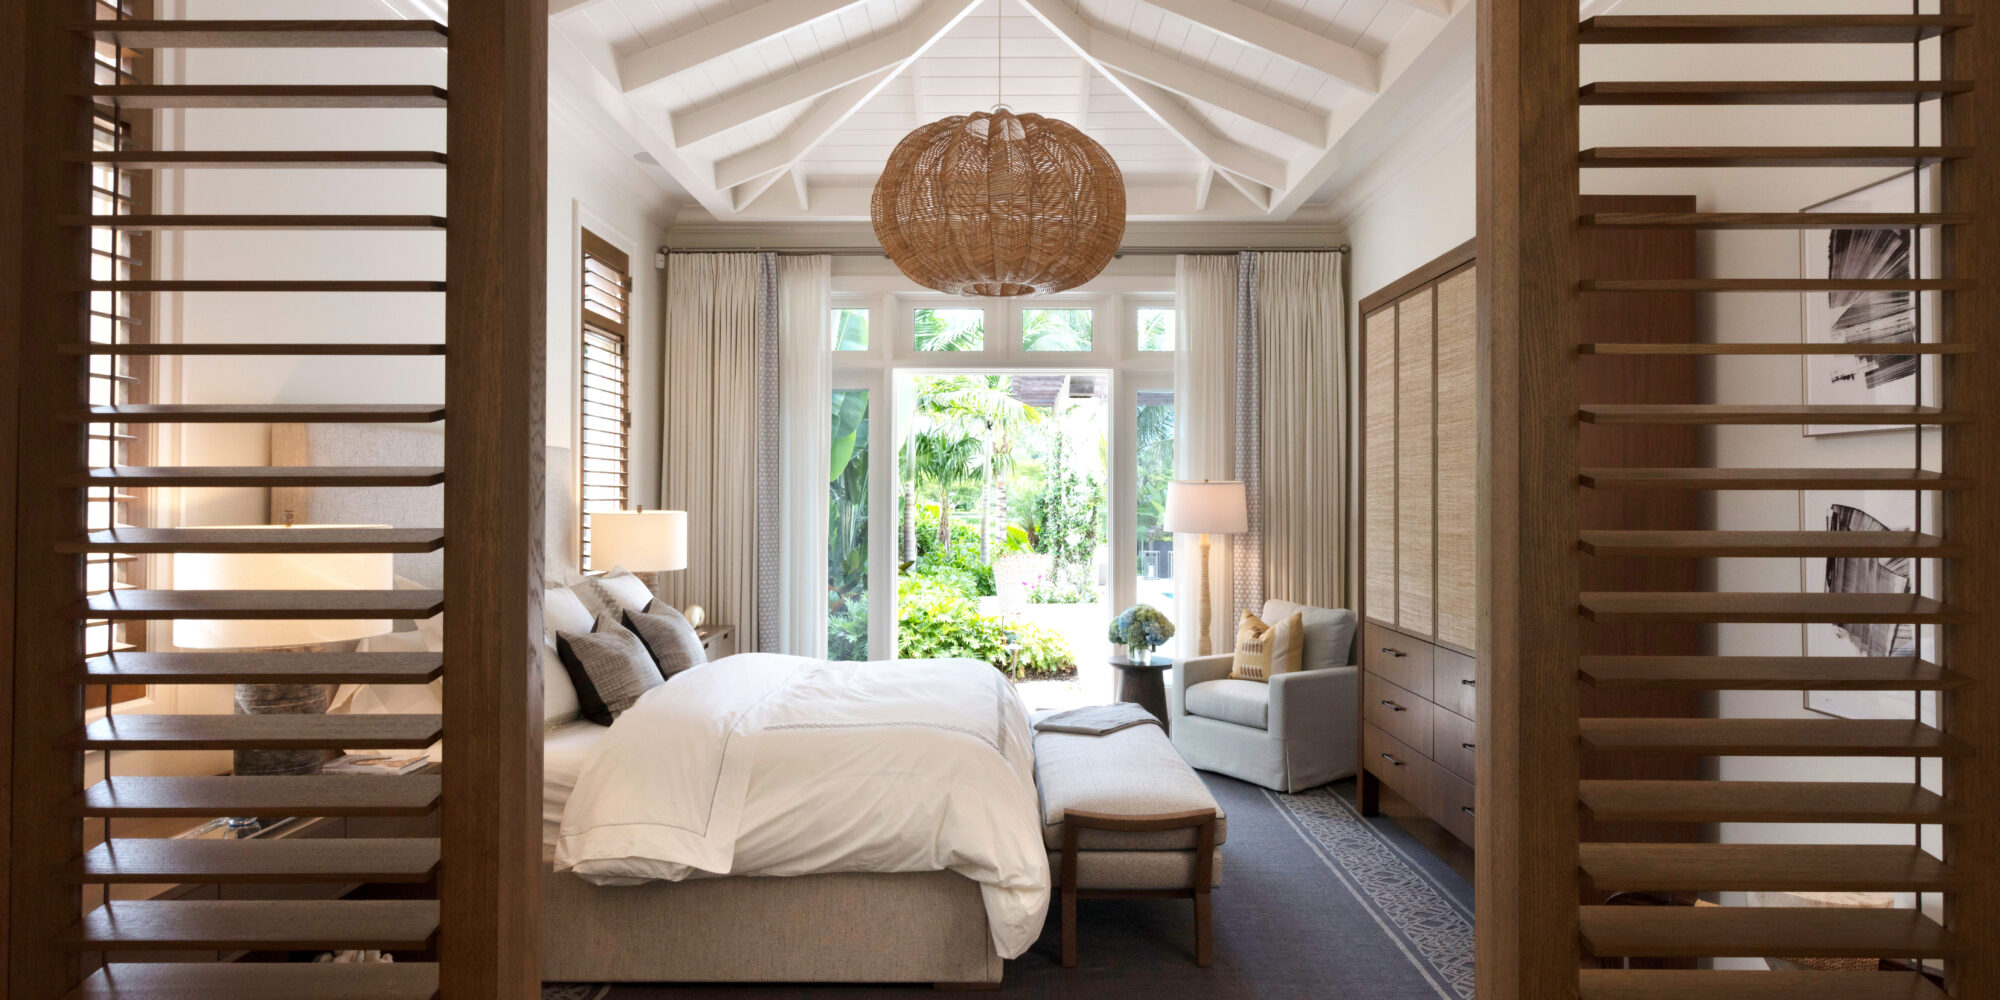 Bright and Airy Bedroom opens up to luscious greenery and beautiful Florida weather.